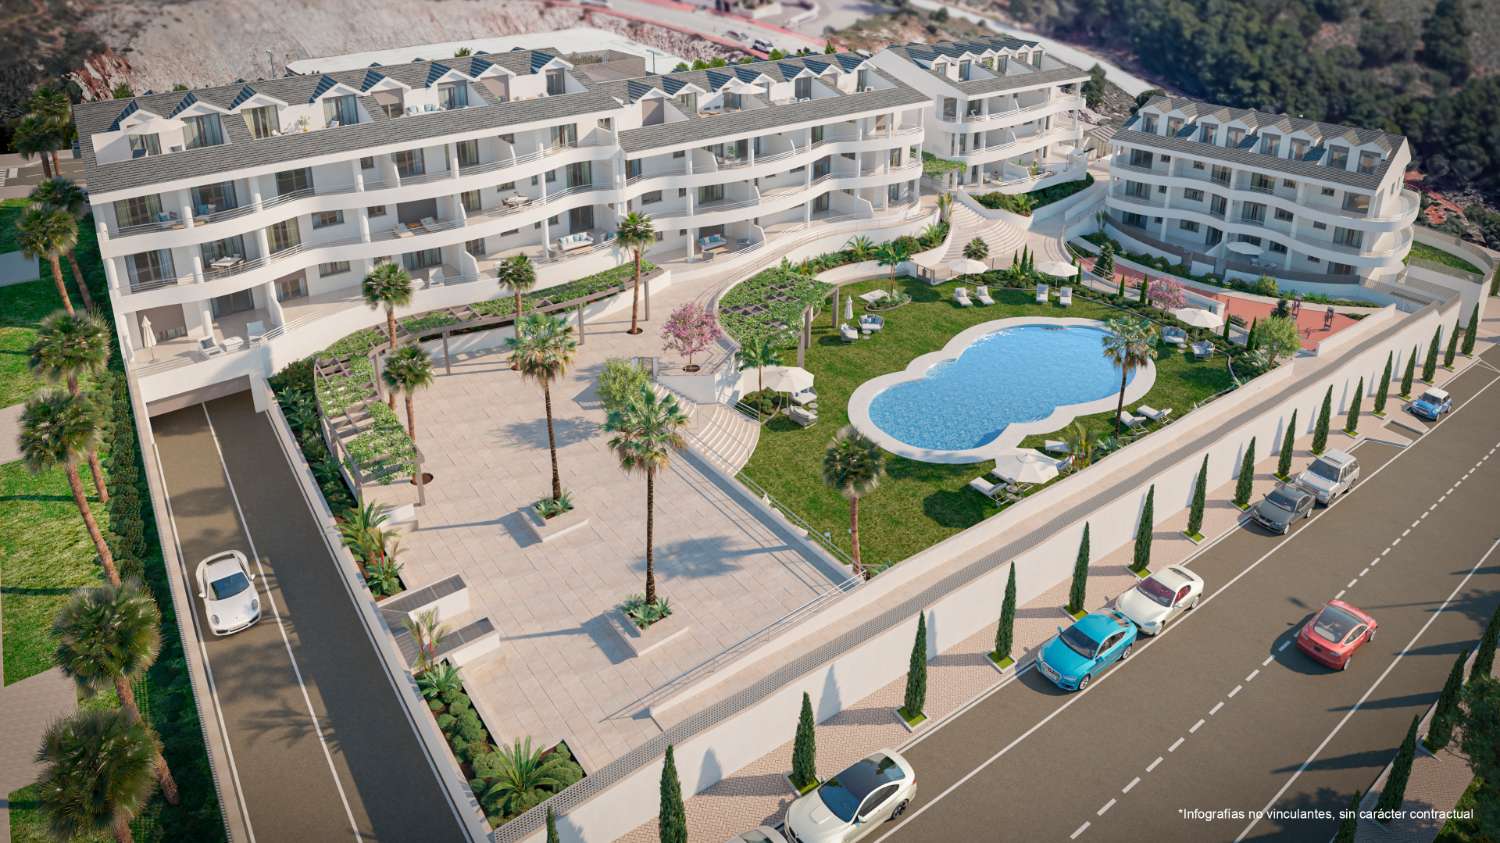 BRAND NEW HOUSING, LAST UNITS! From €358,500